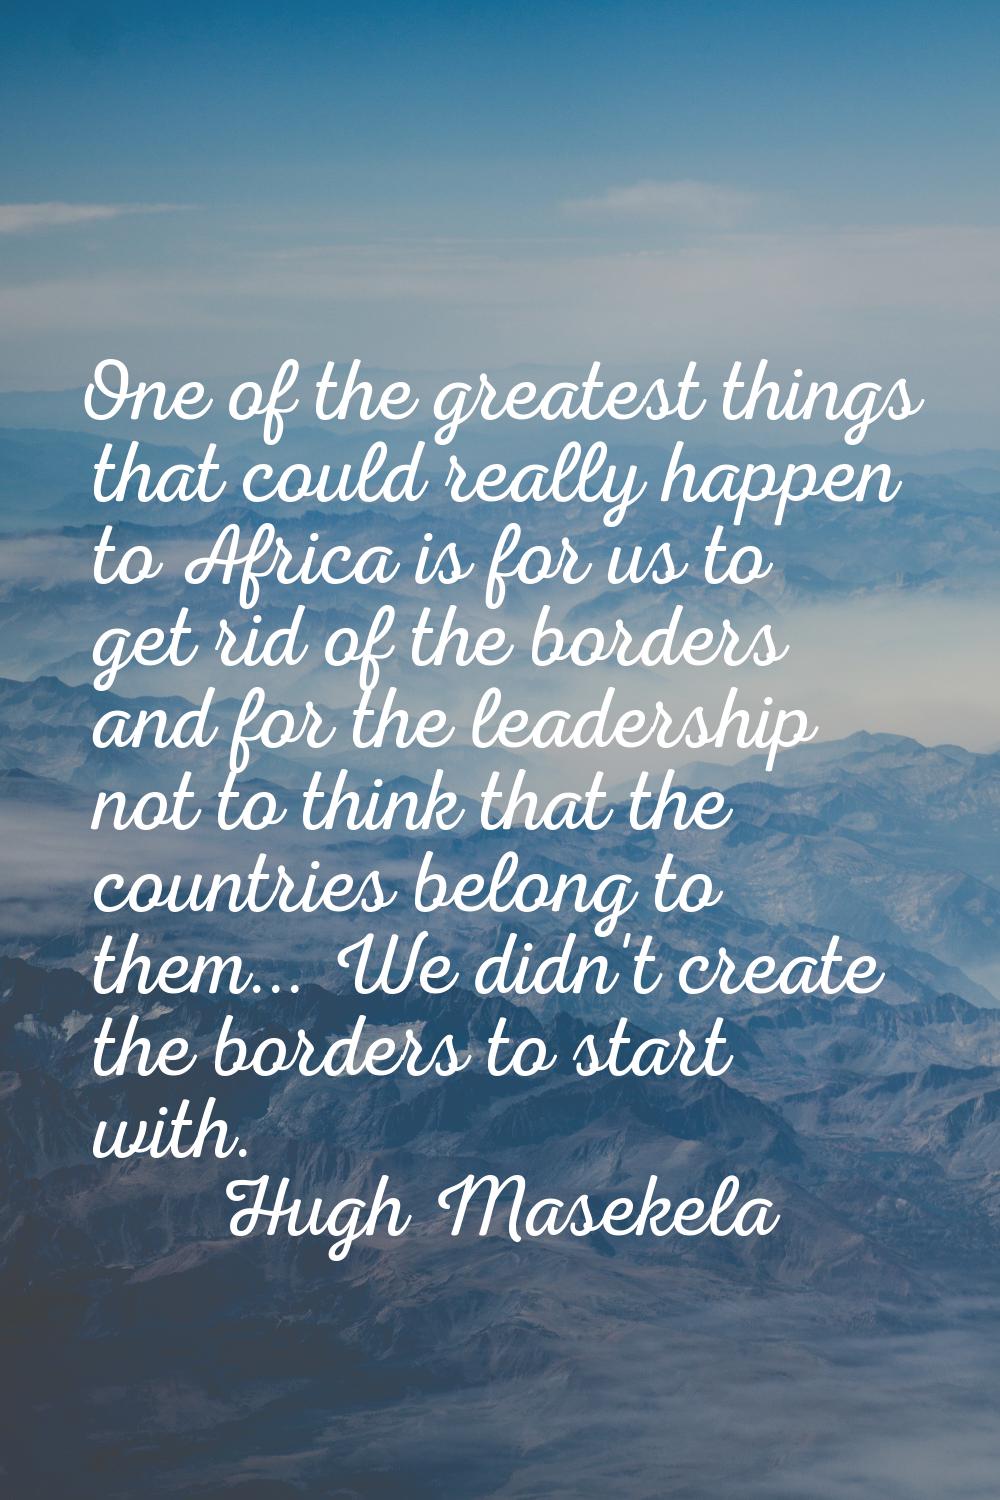 One of the greatest things that could really happen to Africa is for us to get rid of the borders a